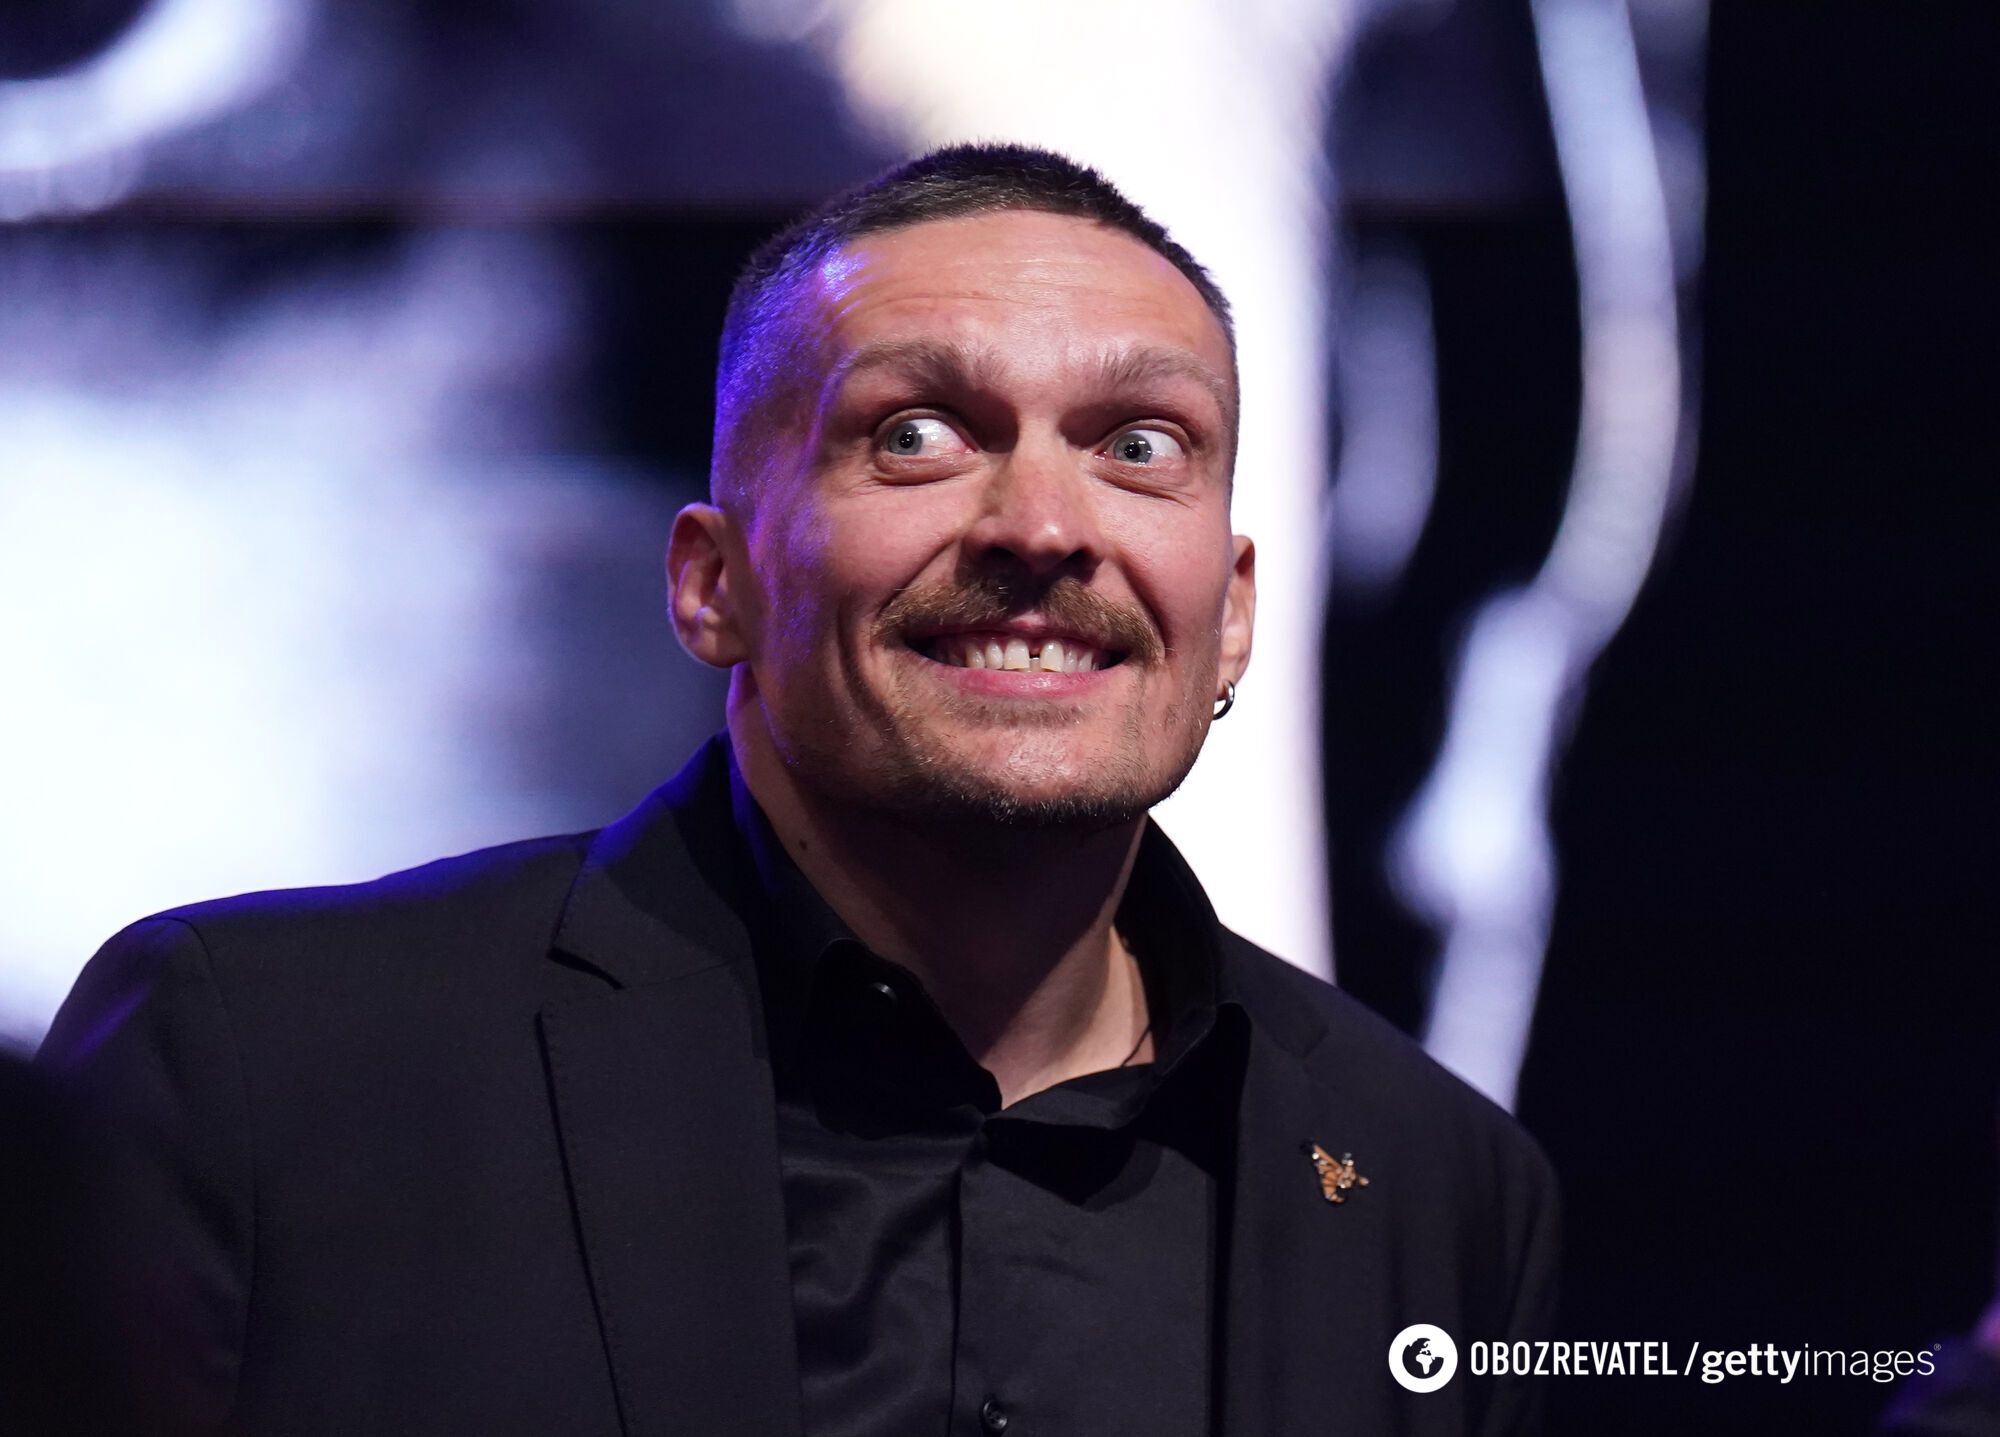 Bellew confessed what Usyk did in Moscow